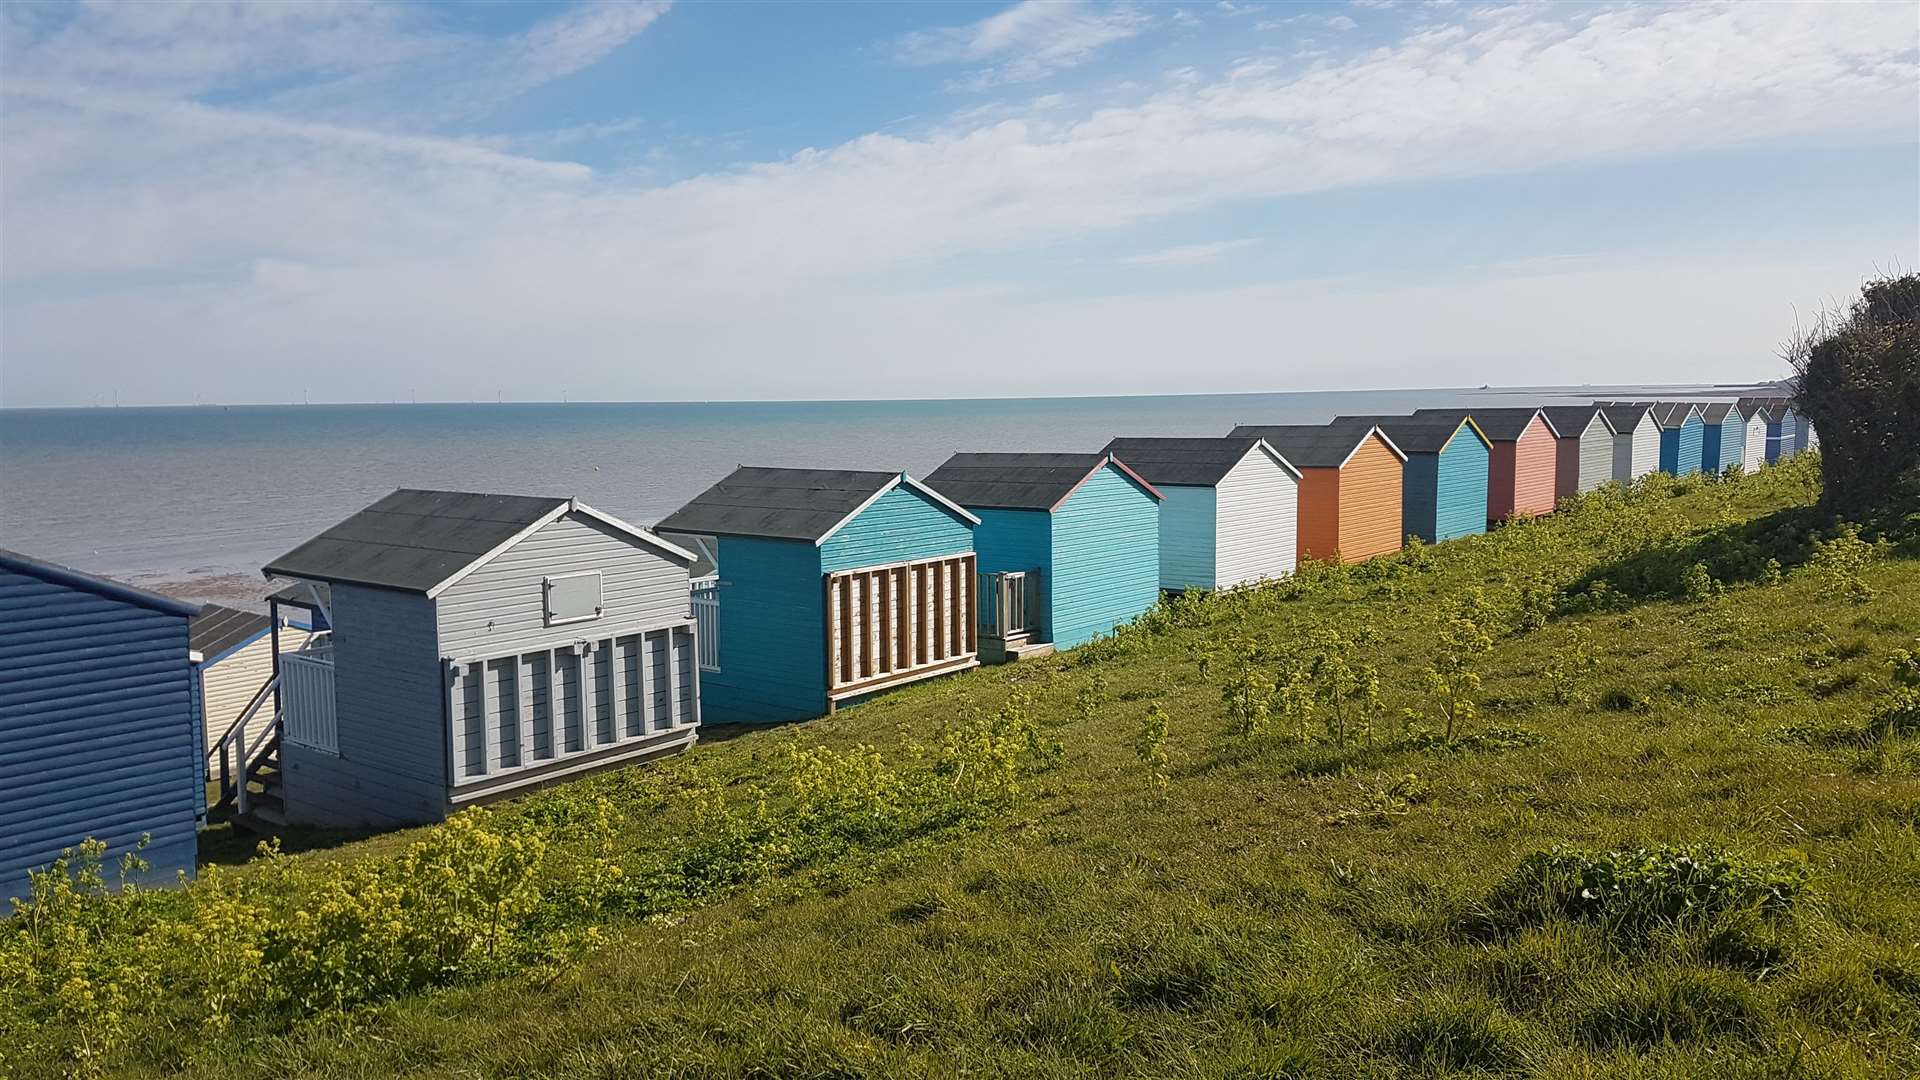 More than 100 residents objected to the latest beach huts scheme in Tankerton, Whitstable